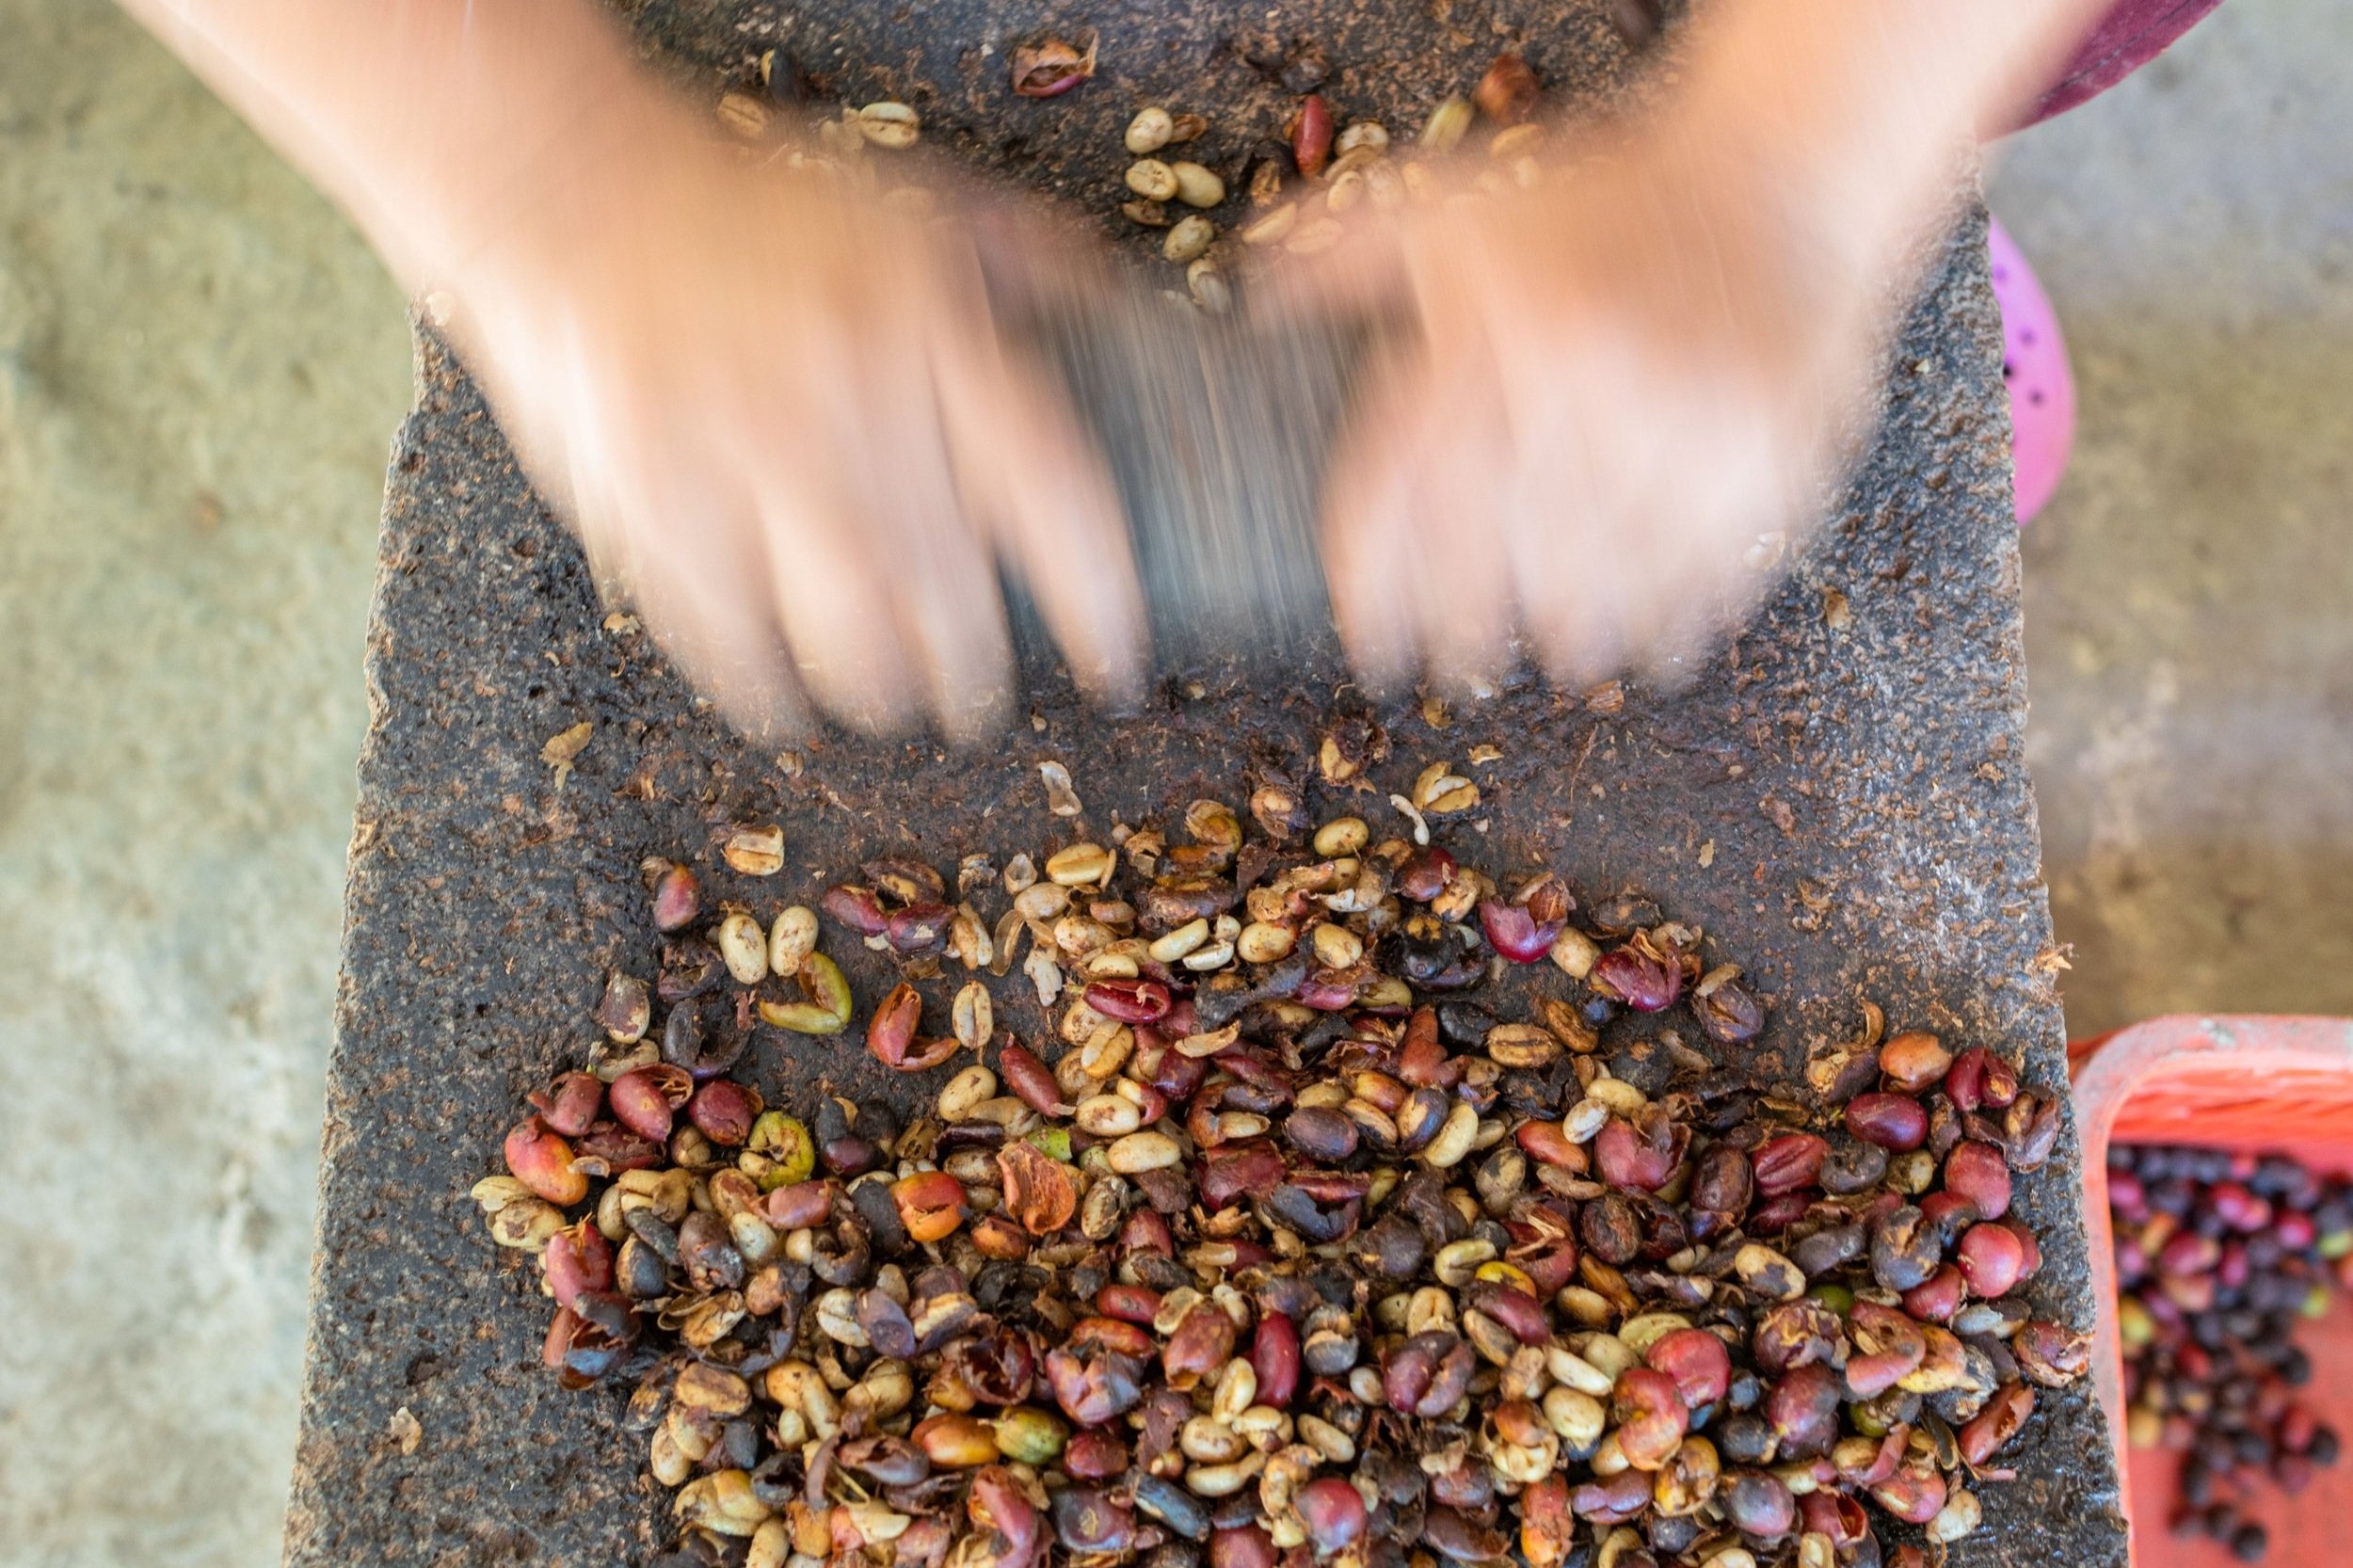 Slow exposure of a woman grinding beans on a stone grinder at her garden in San Marcos.